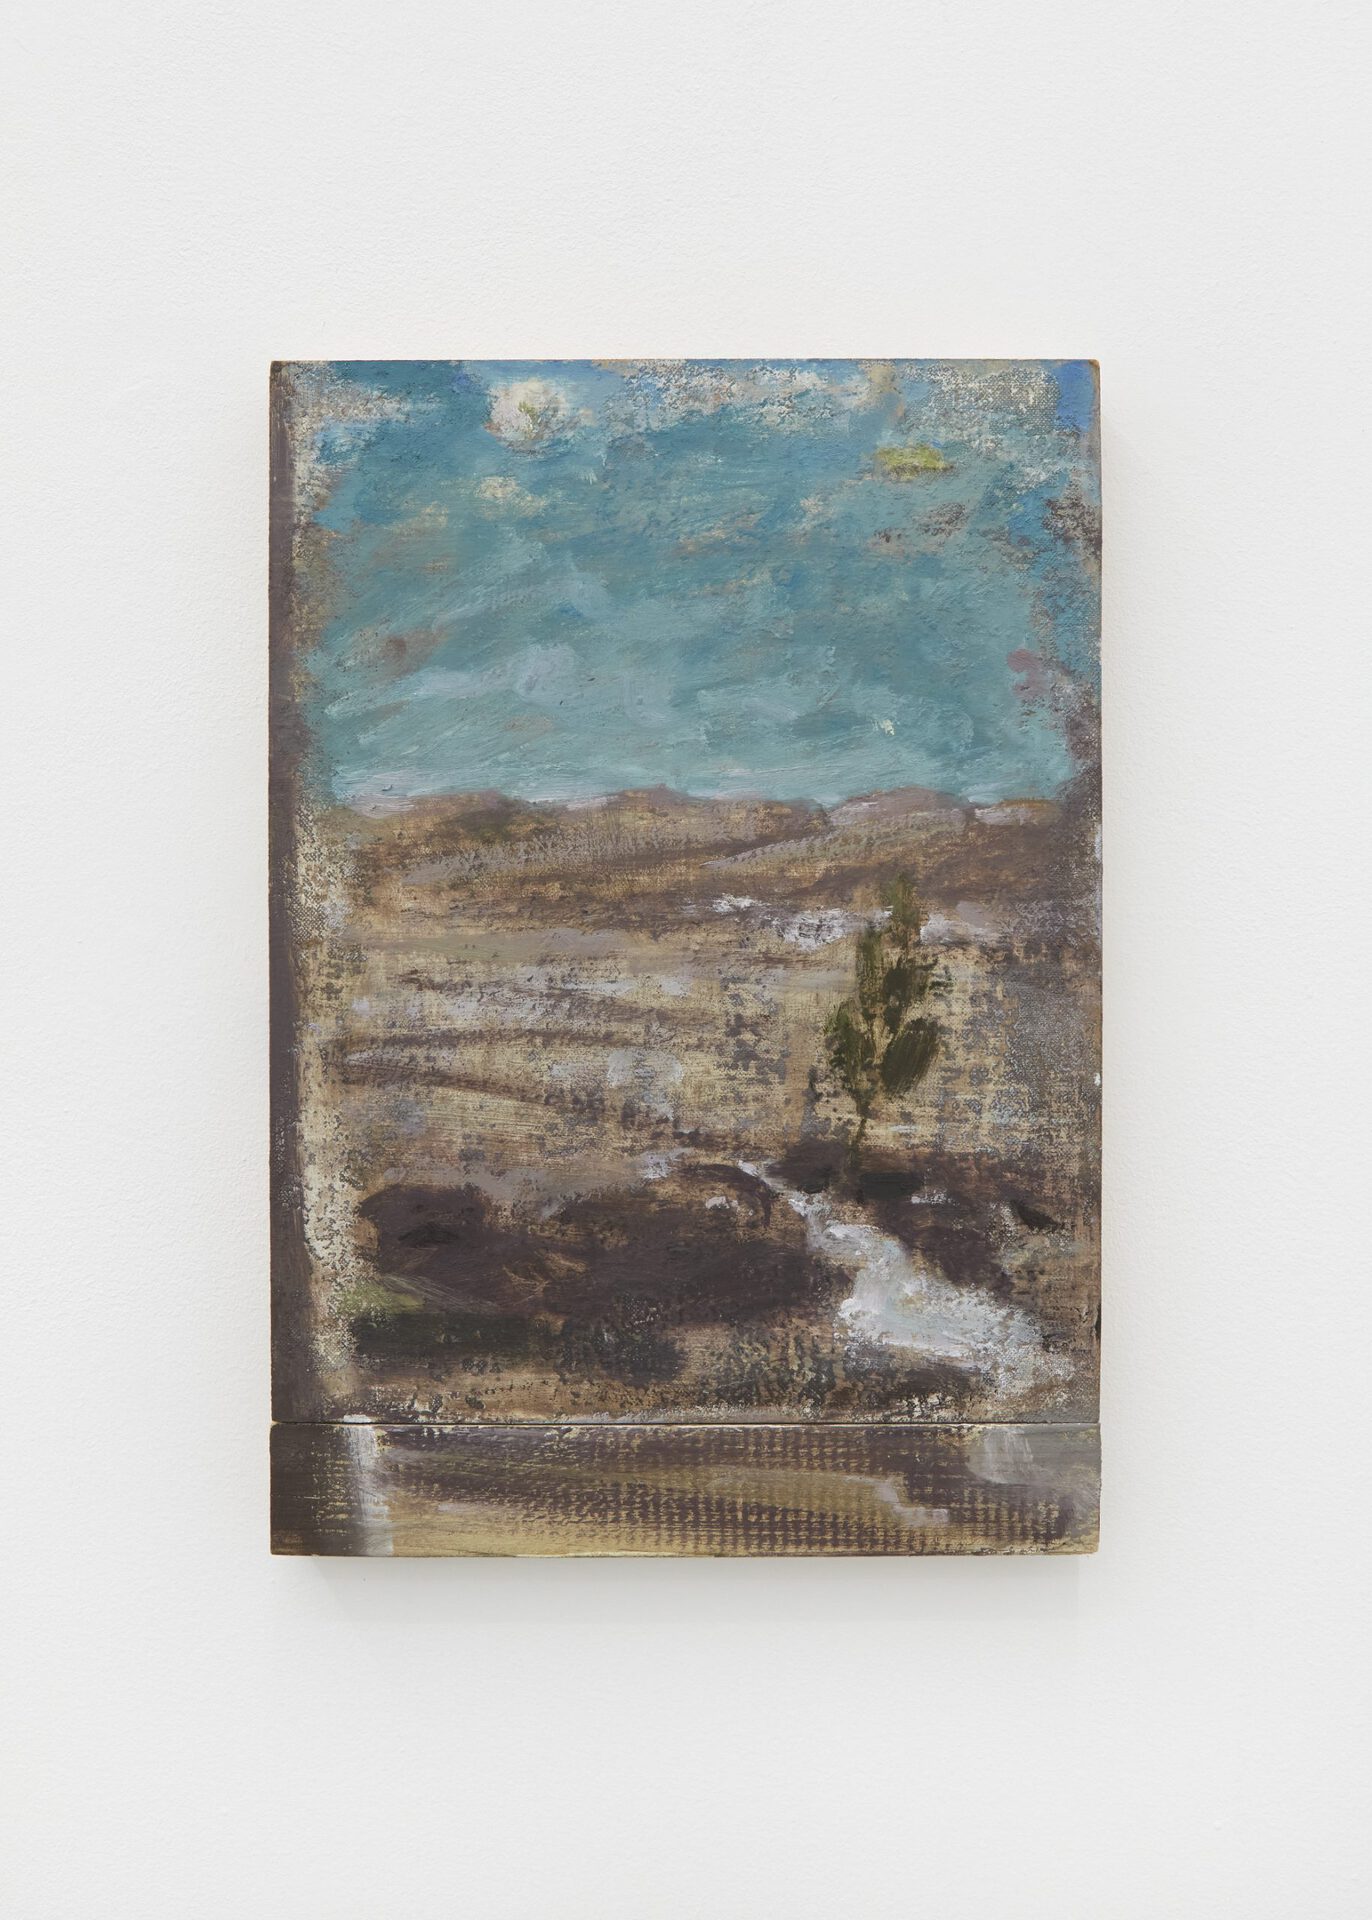 Andrew North, Border, 2021. Oil and gesso on board, 38 x 25 cm